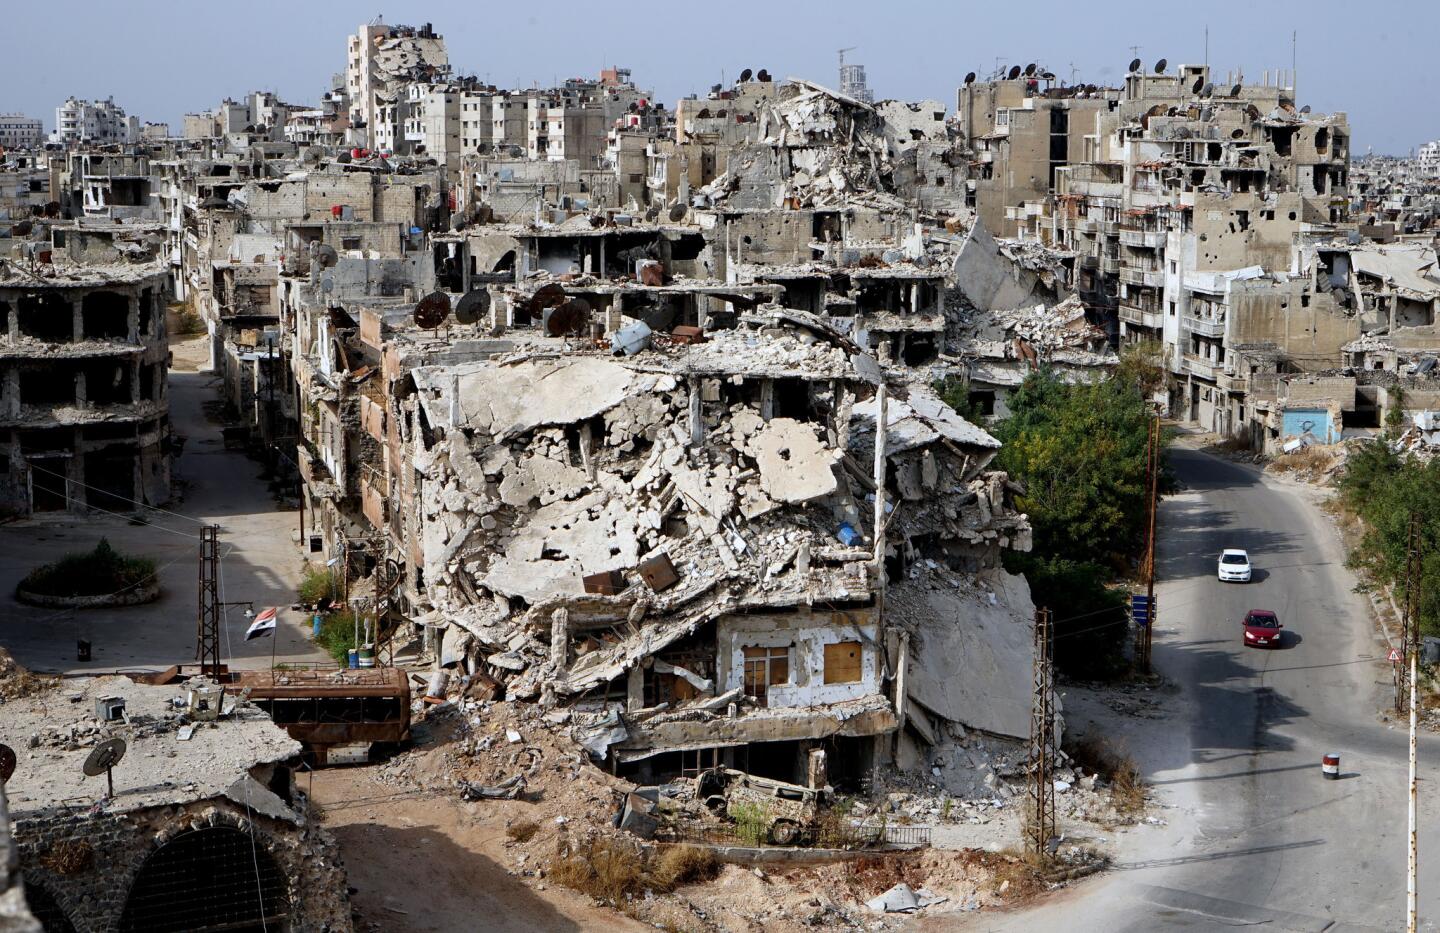 Homs’ Old City. Gutted apartment blocks in Homs once housed its long-prospering merchant class.